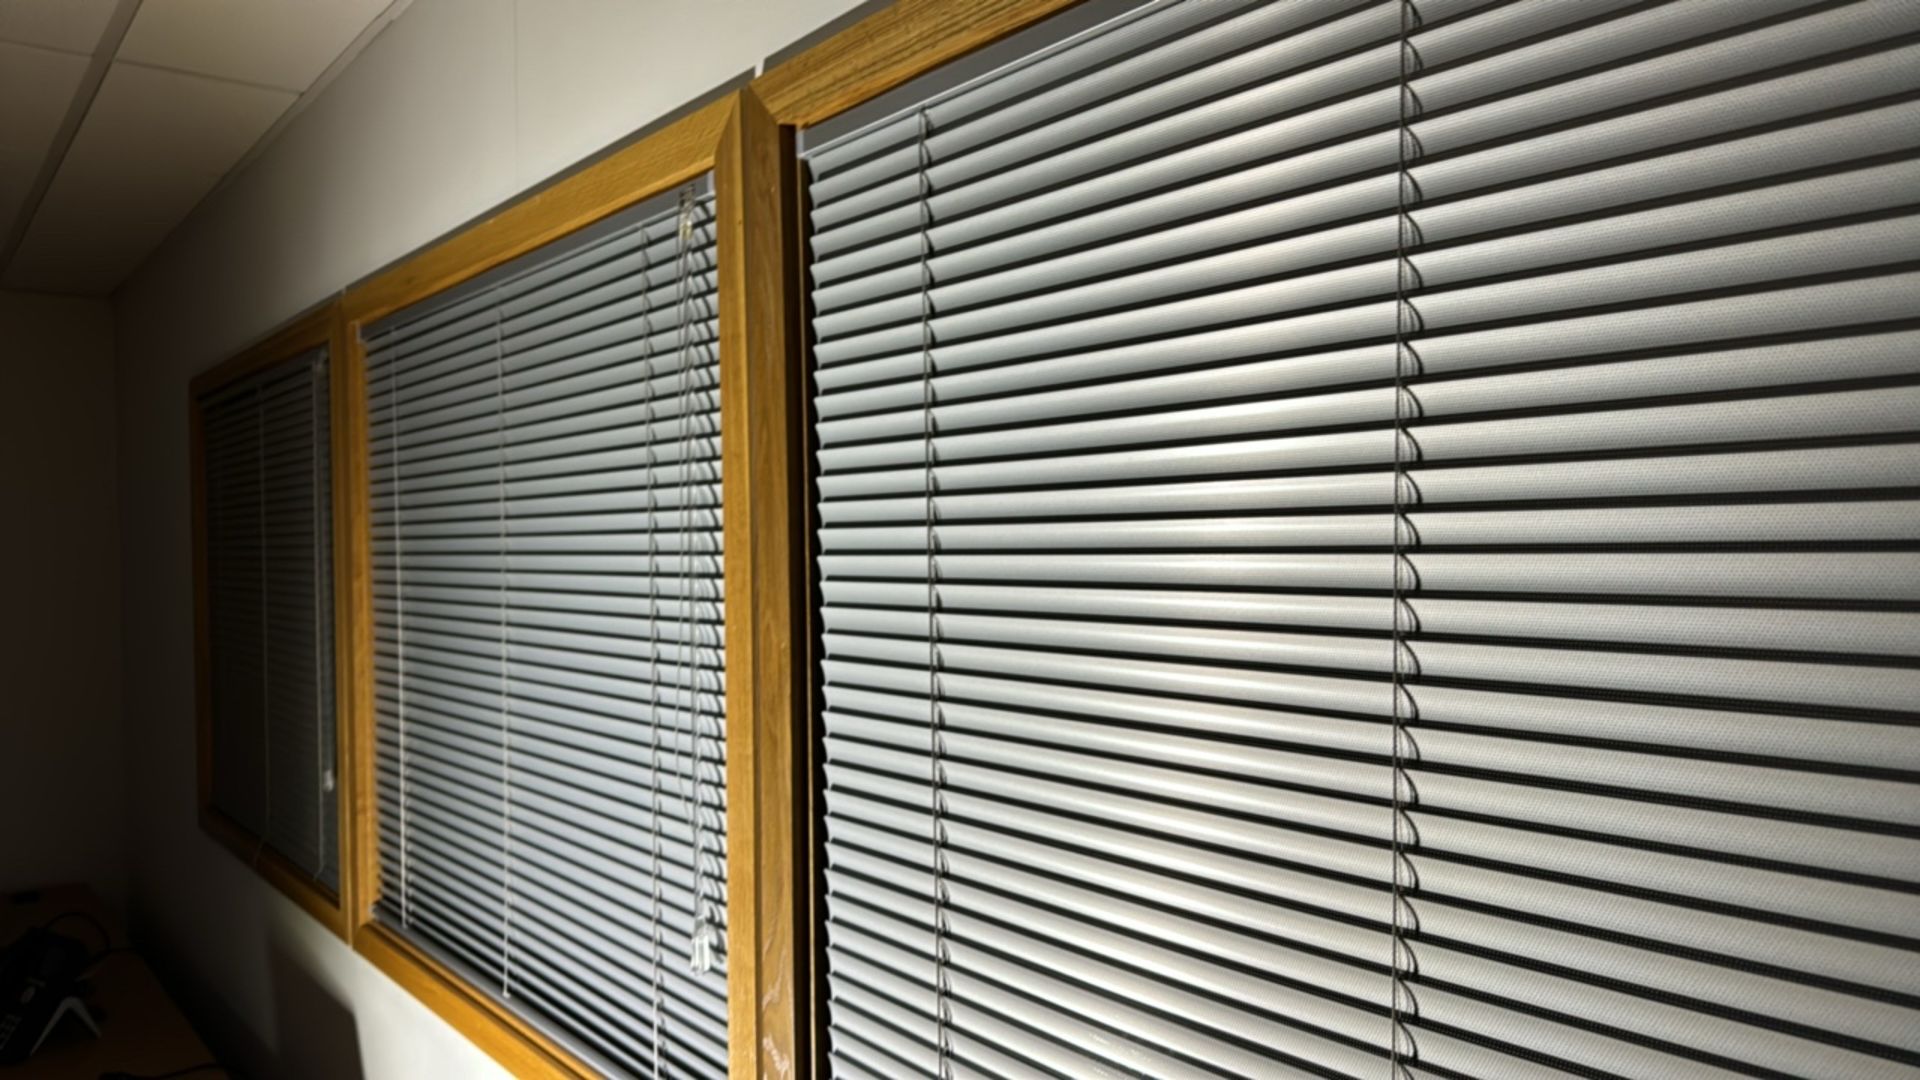 Window Blinds x12 - Image 4 of 4